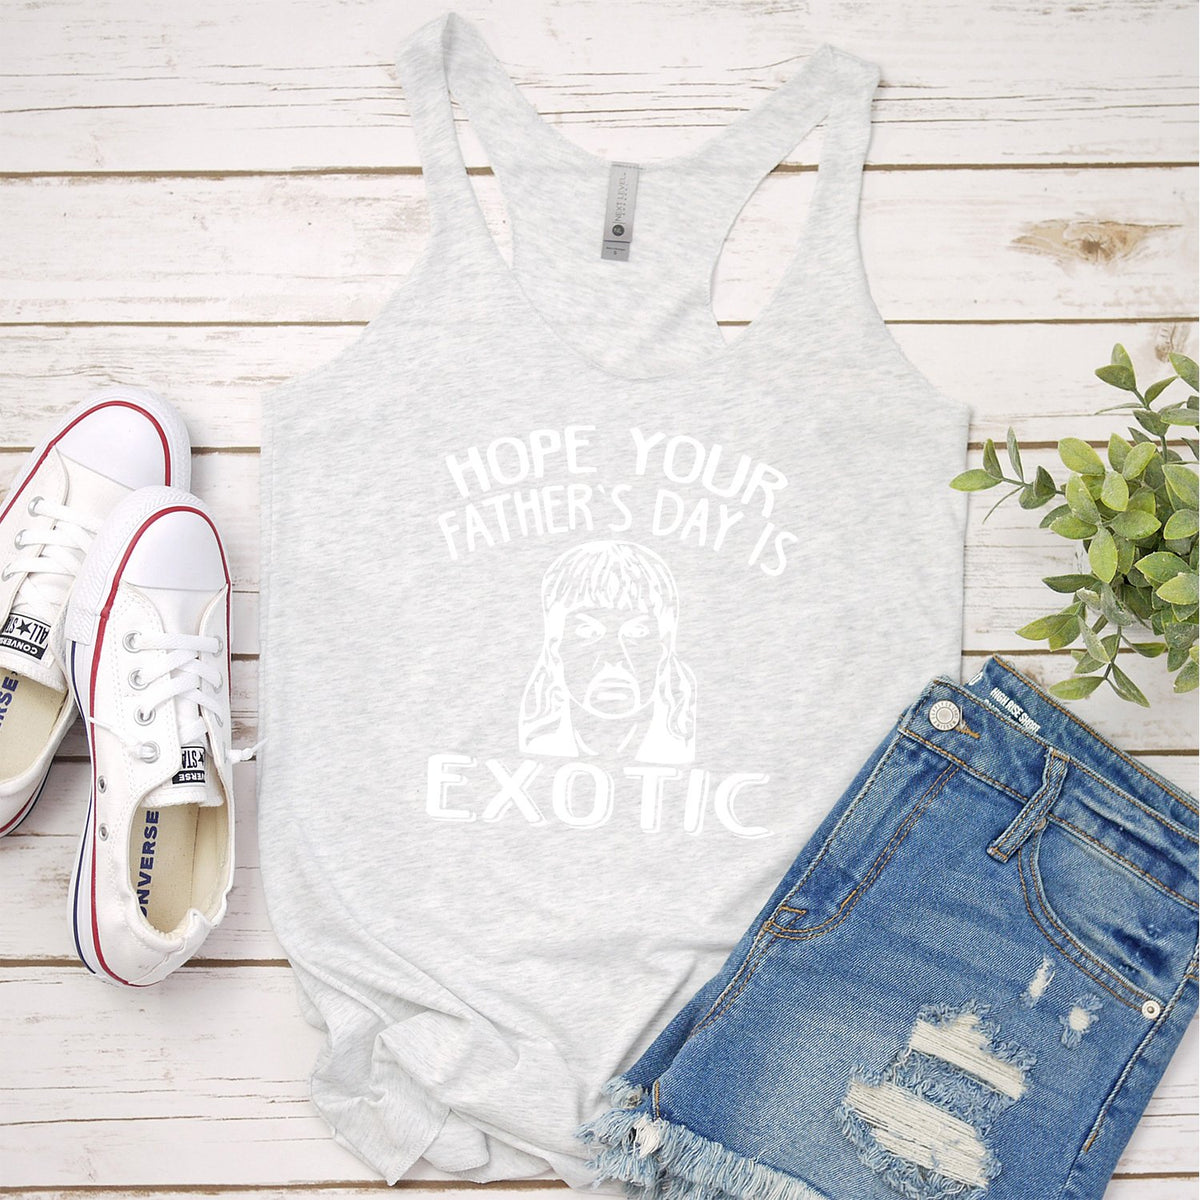 Hope Your Father&#39;s Day is Exotic - Tank Top Racerback